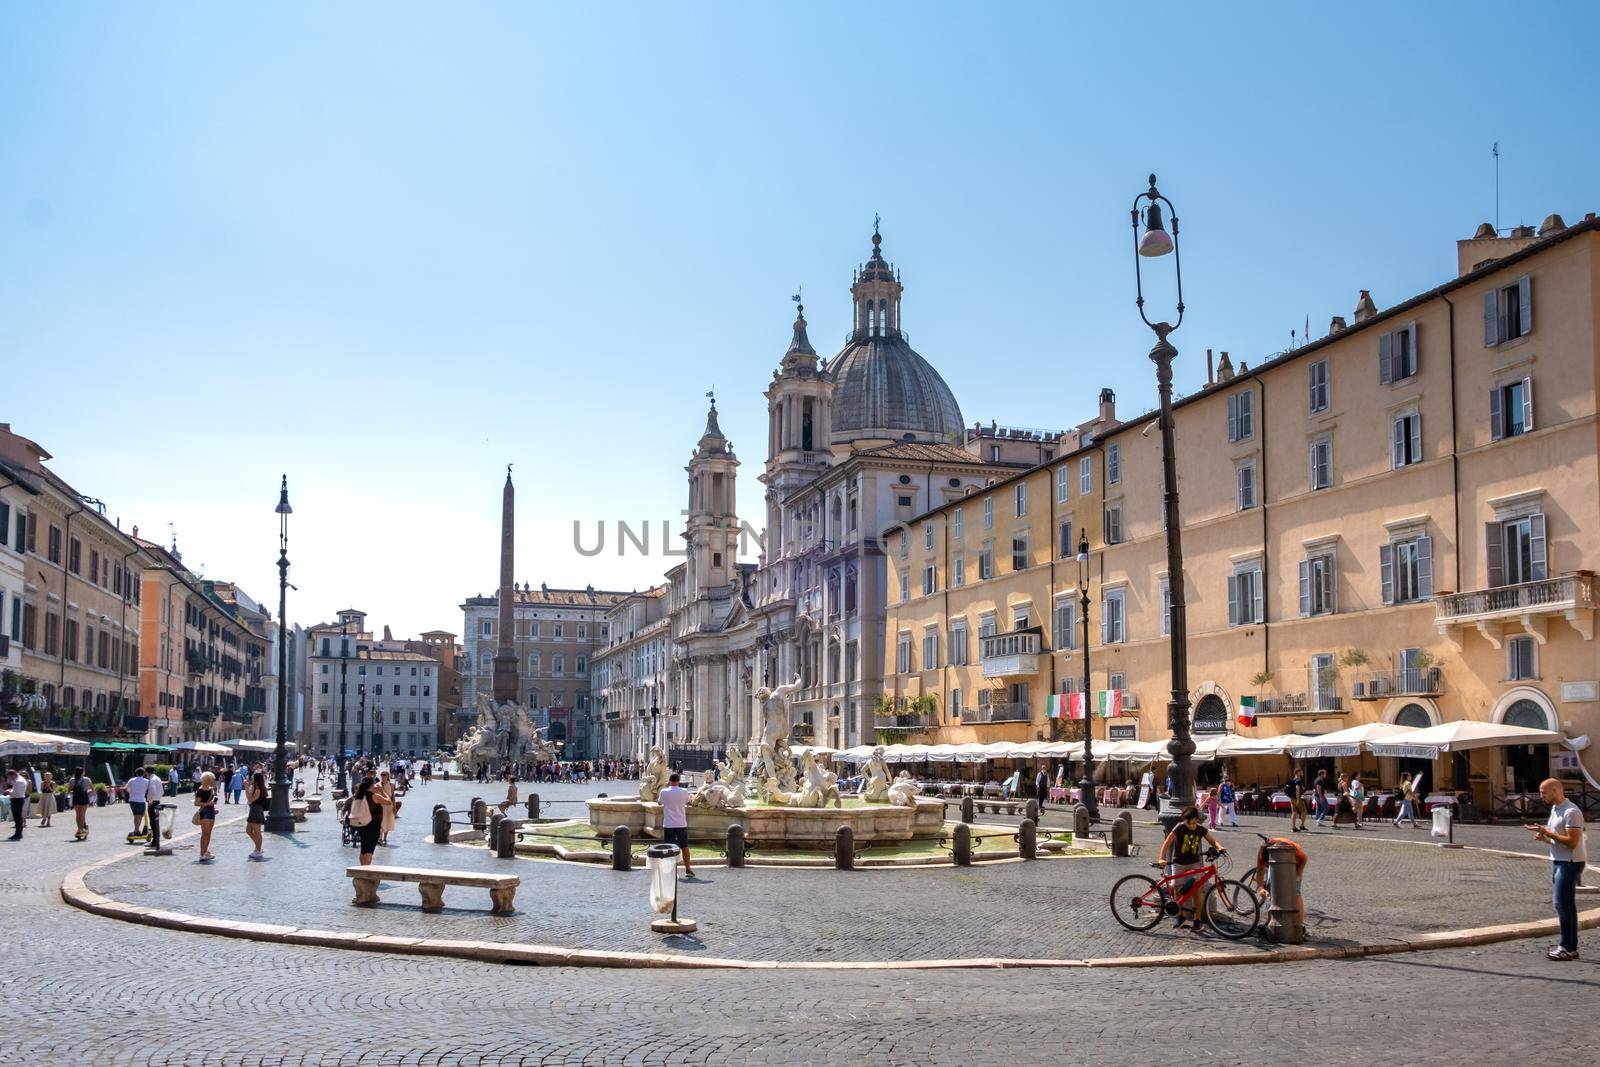 Piazza Navona in Rome, Italy in the morning by fokkebok